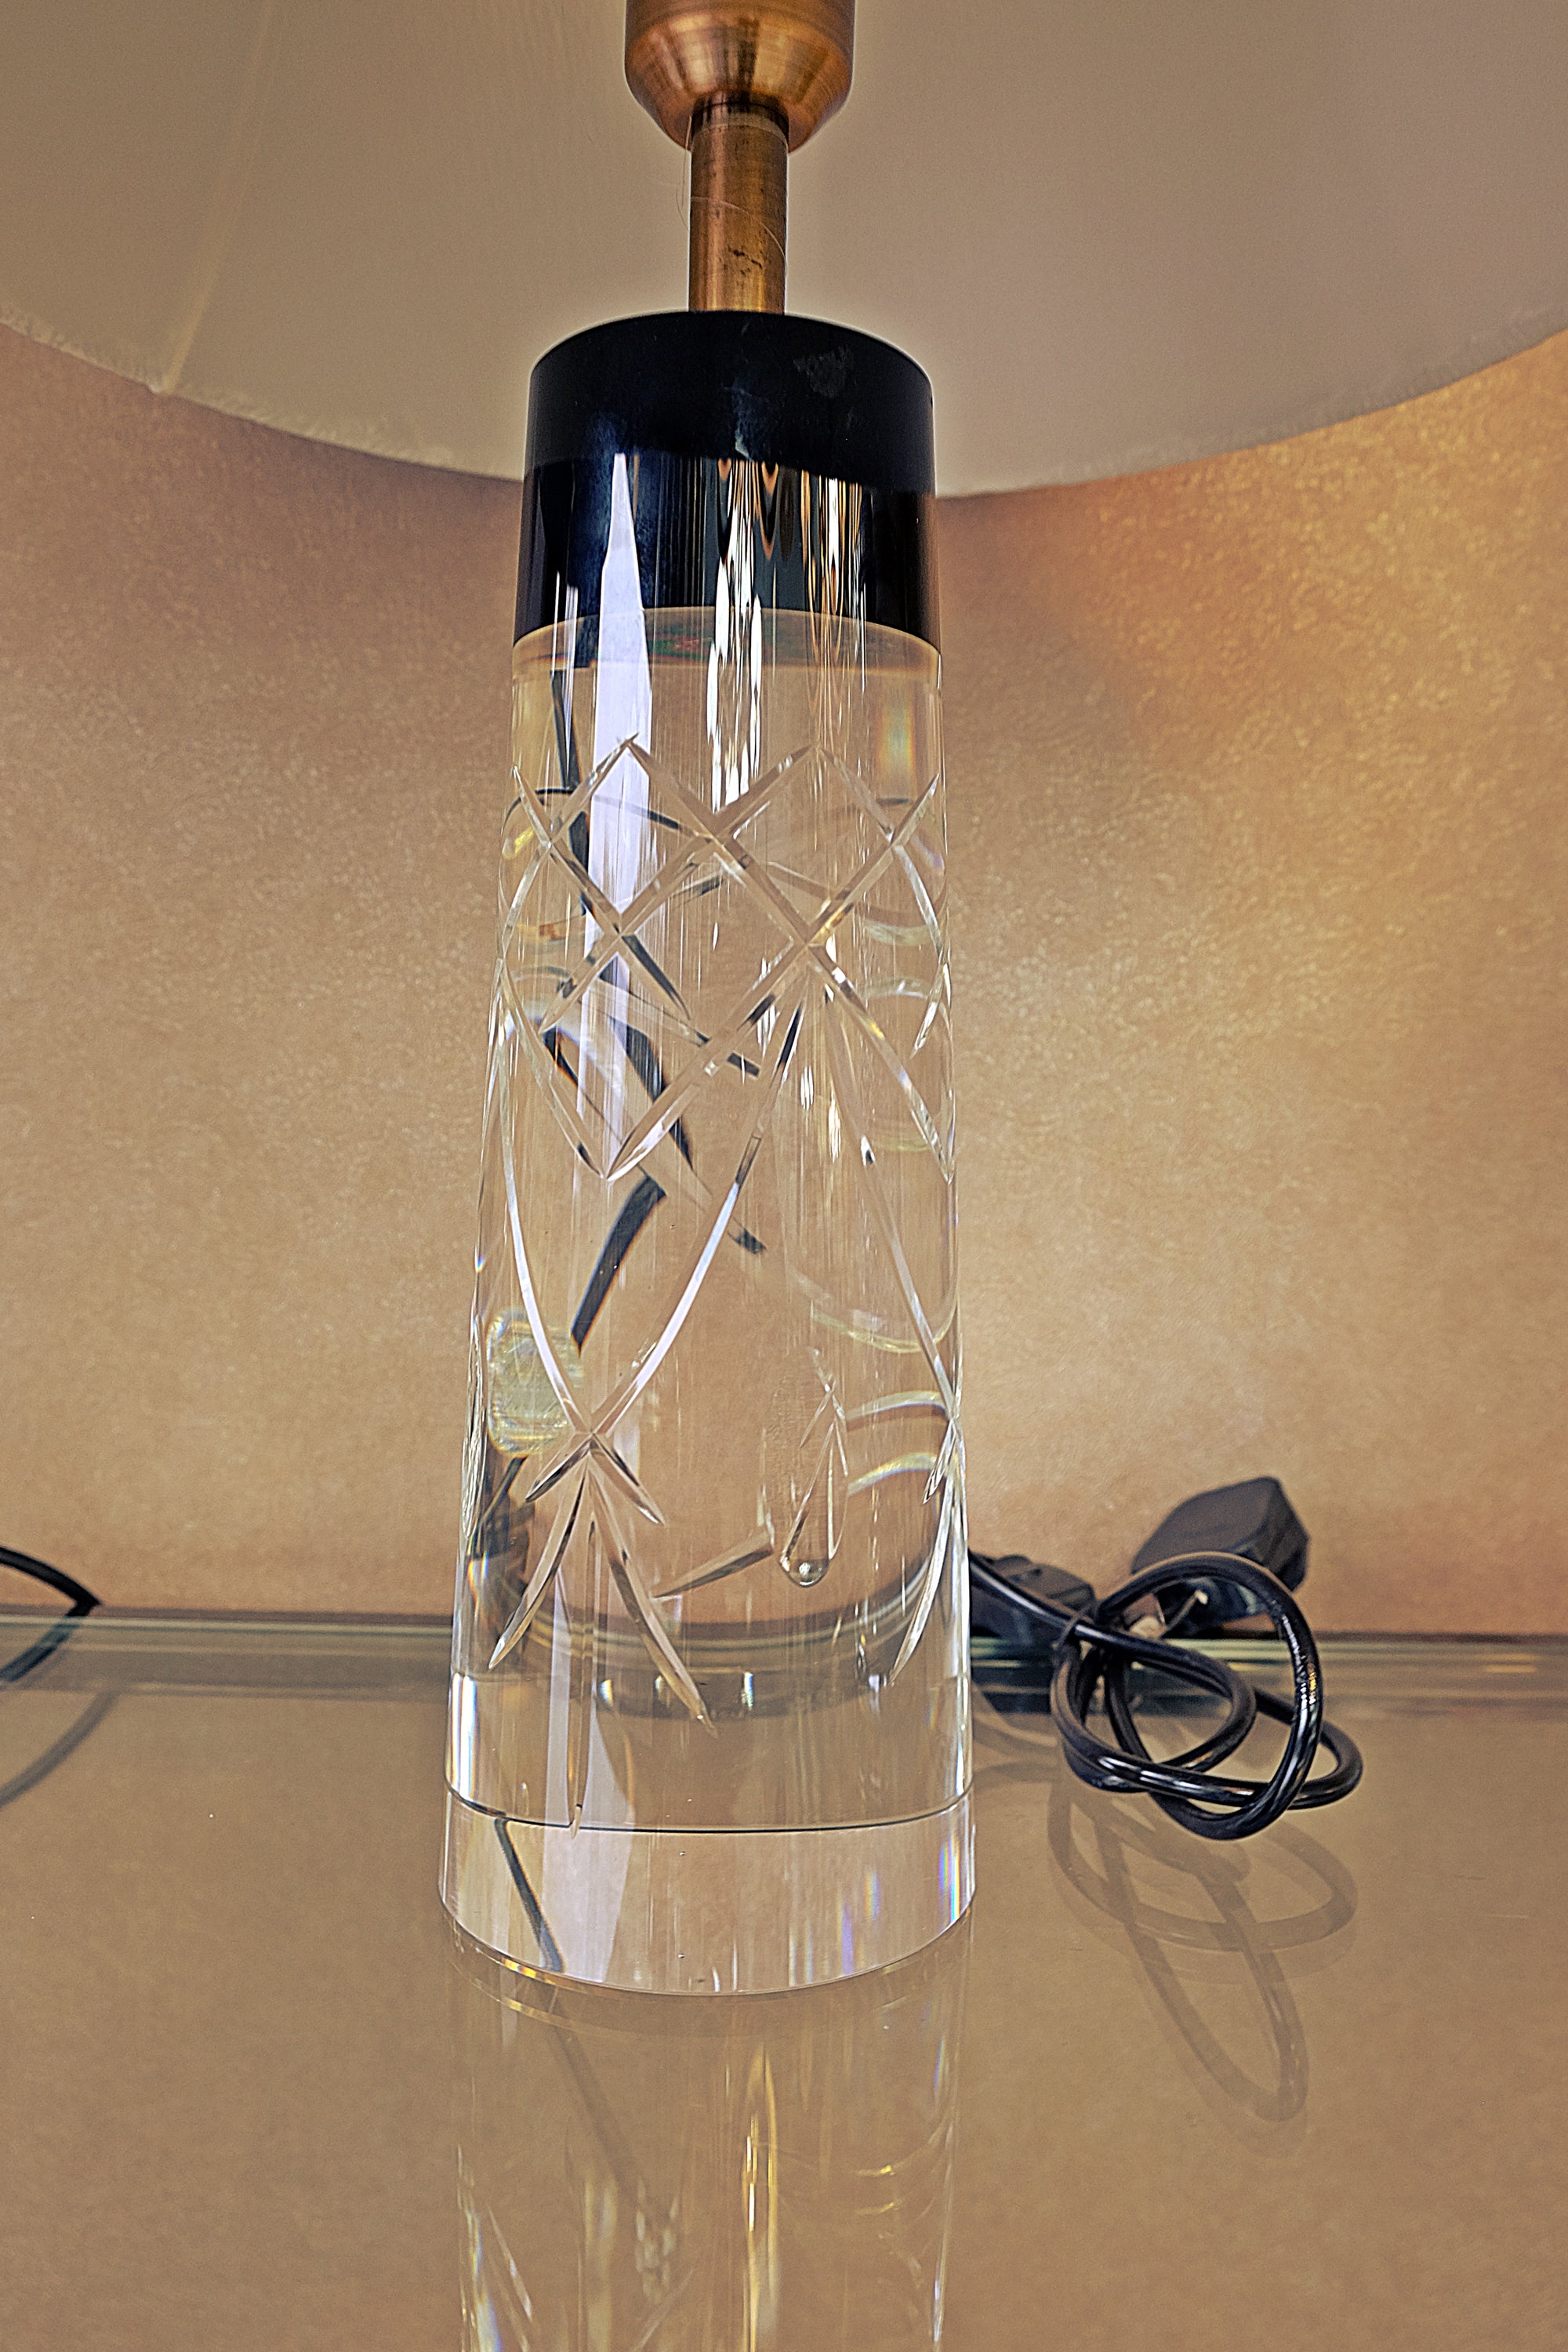 Strong crystallic cylindrical lamp, black & see-through body [F095]